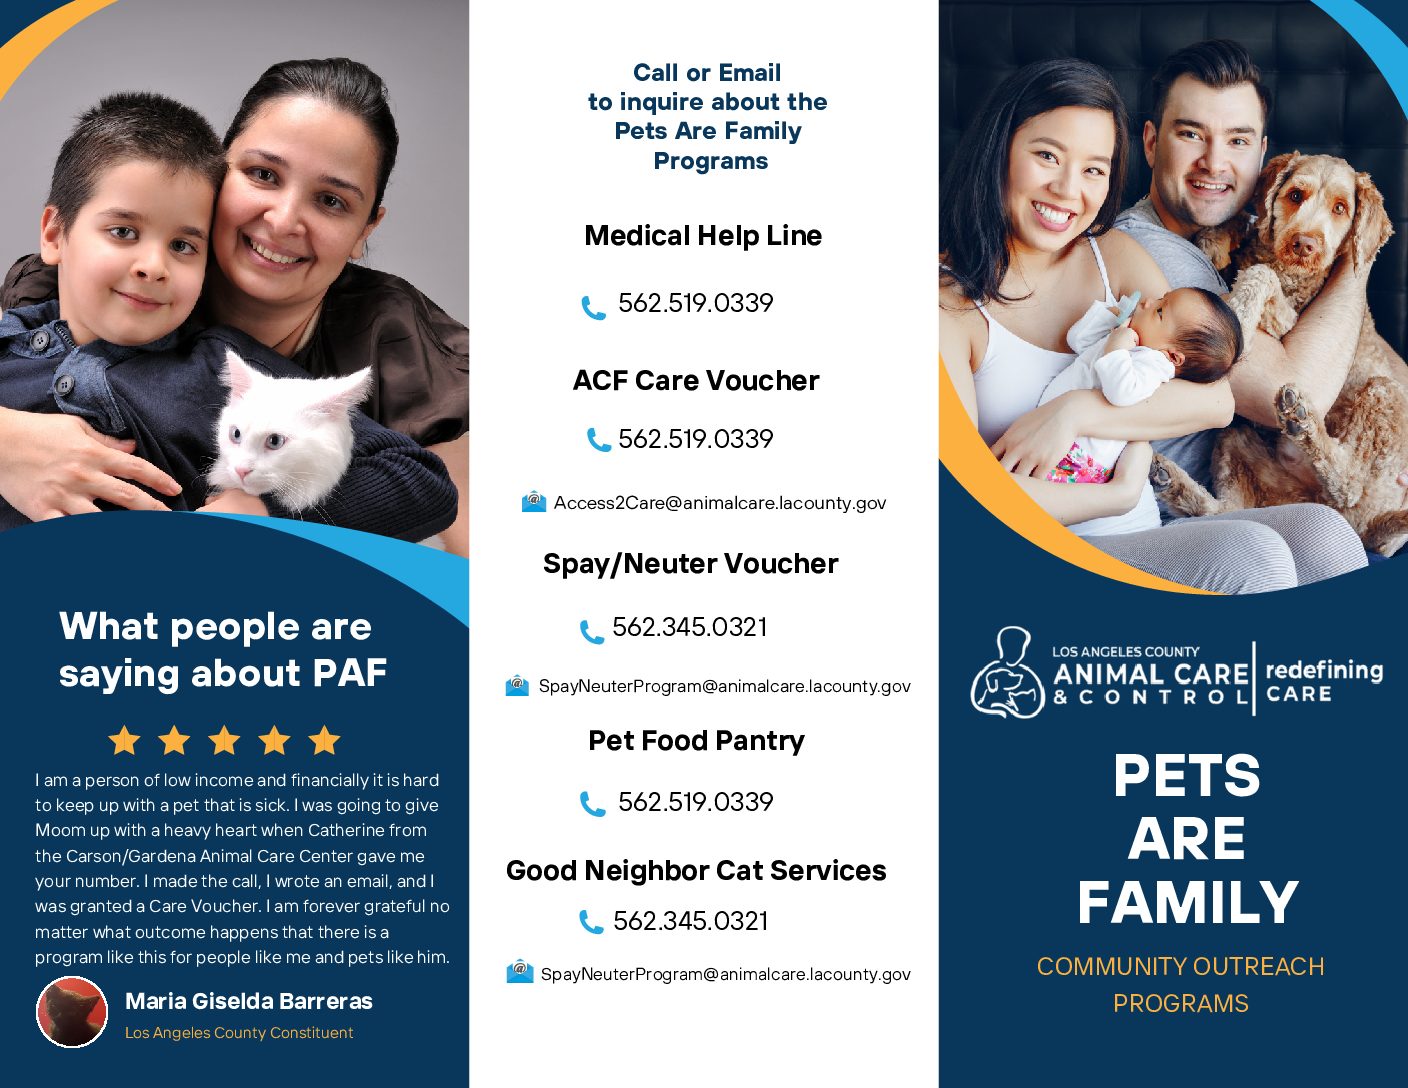 DACC Support Services - Animal Care and Control